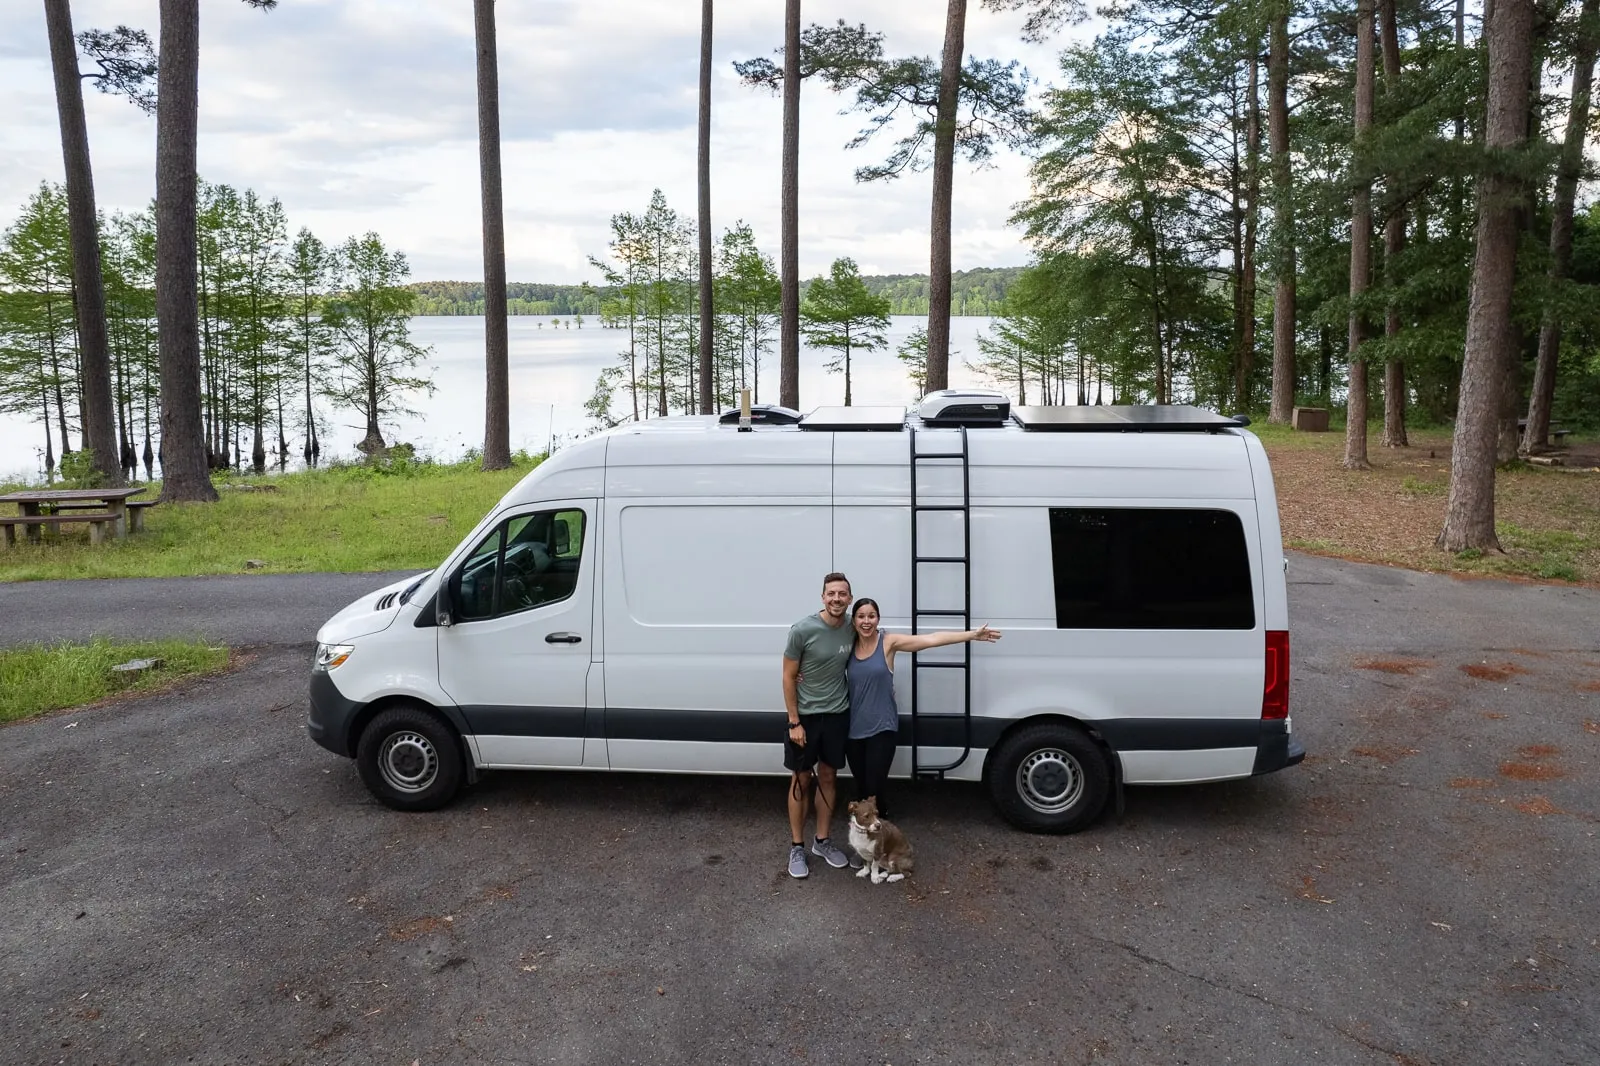 6 upgrades to our van conversion (after 3+ years of van life)